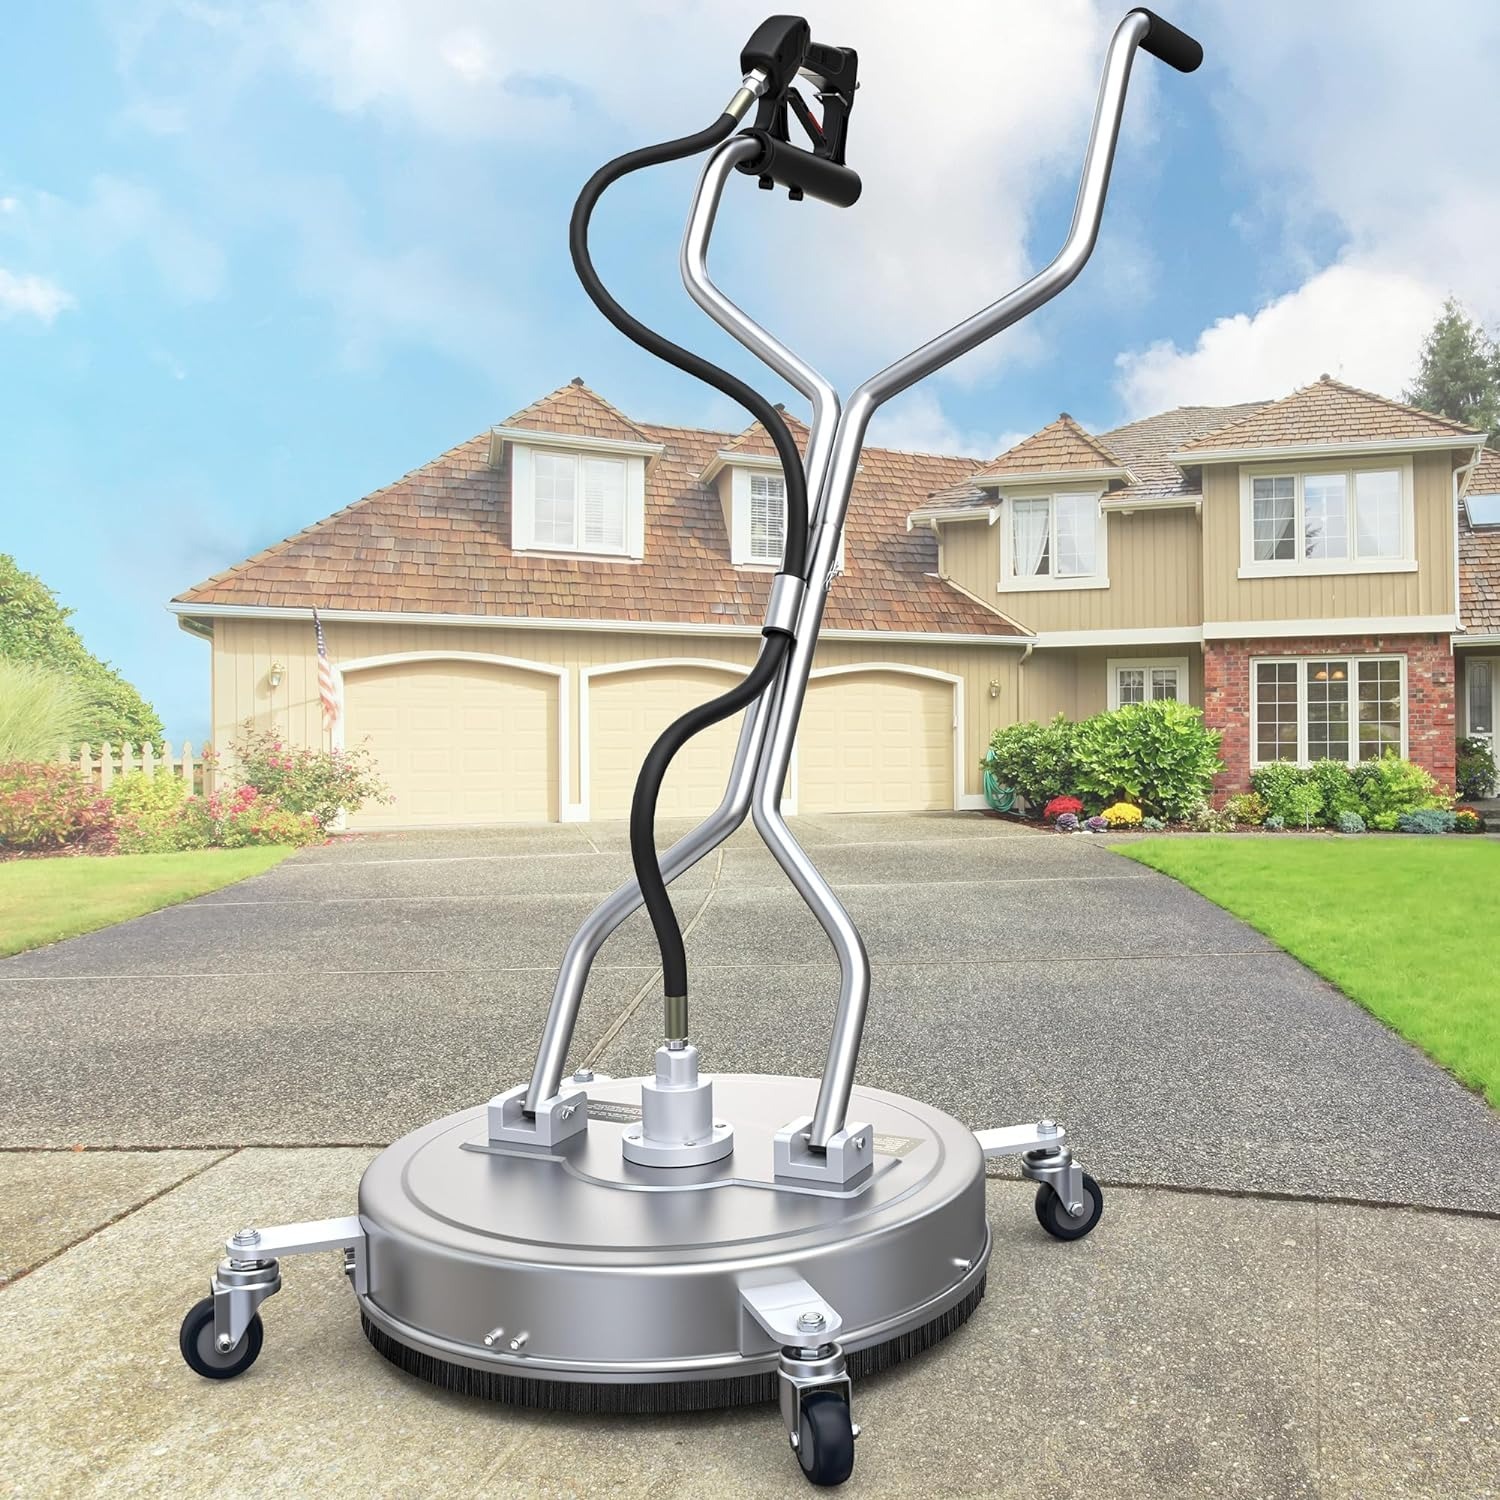 20" Yitahome 4000 PSI Dual Handle Pressure Washer w/ 2 Nozzles $174 + Free Shipping